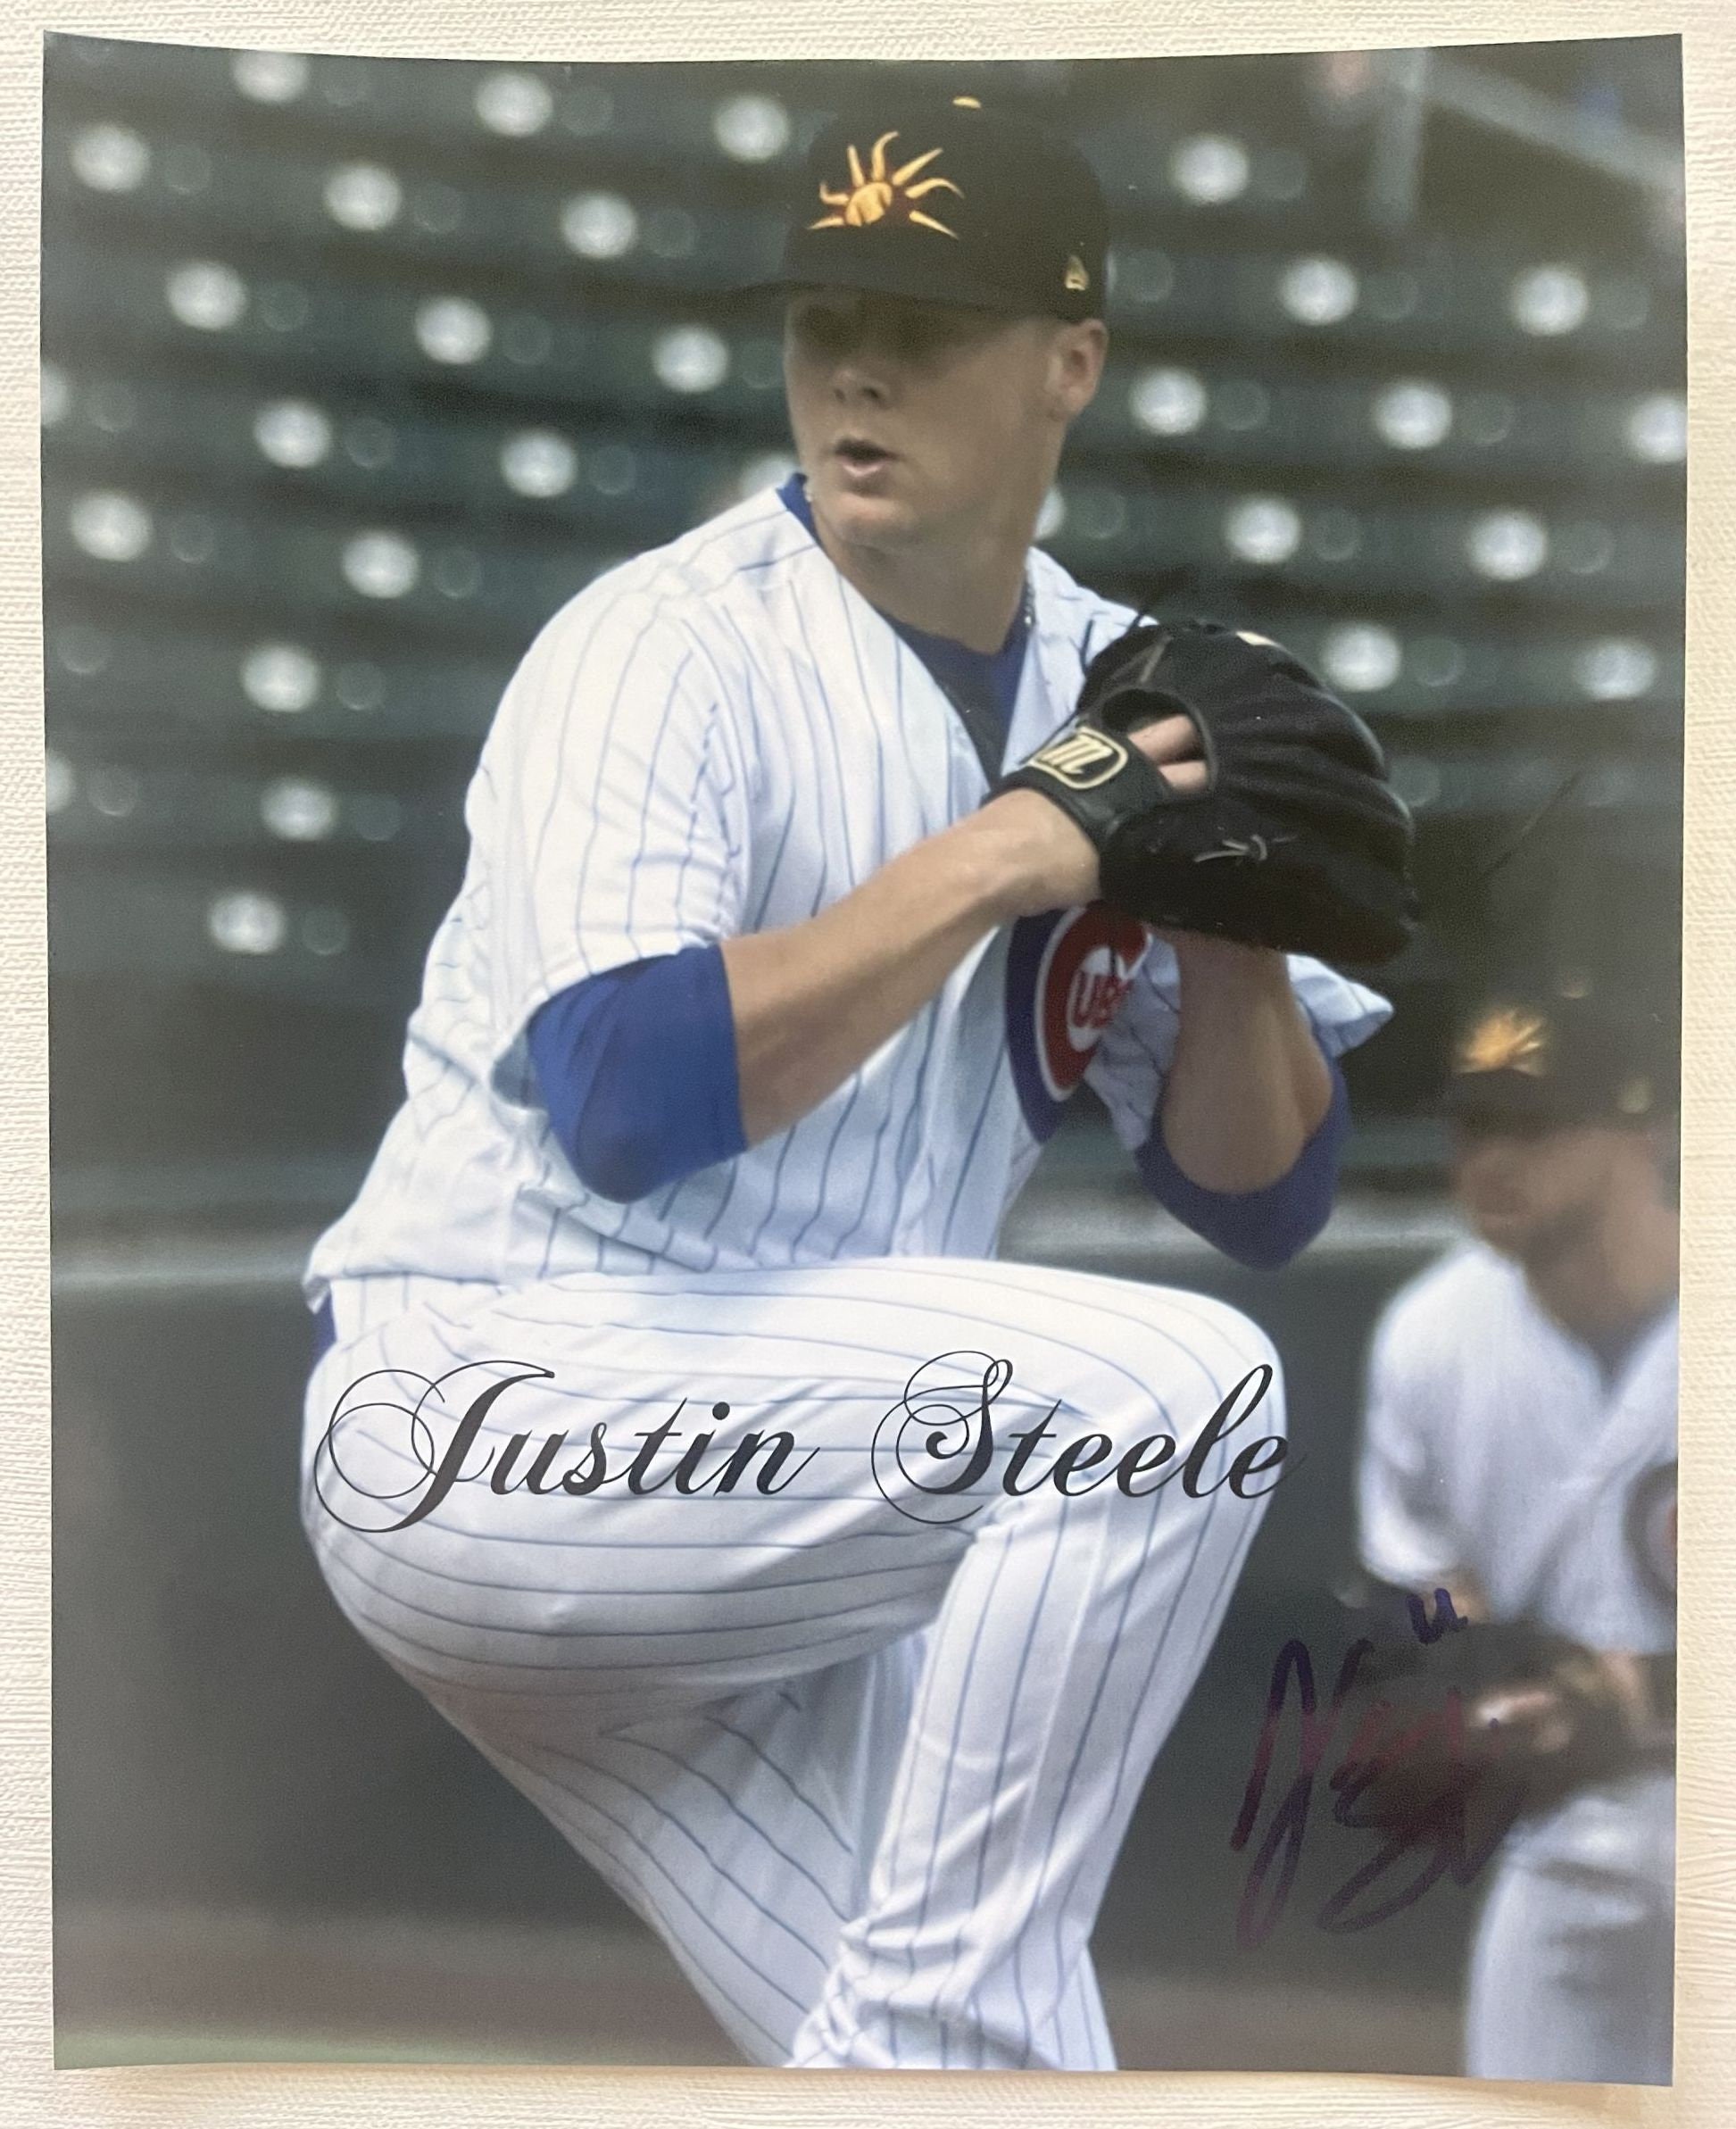 Justin Steele Signed Autographed Glossy 8x10 Photo - Chicago Cubs